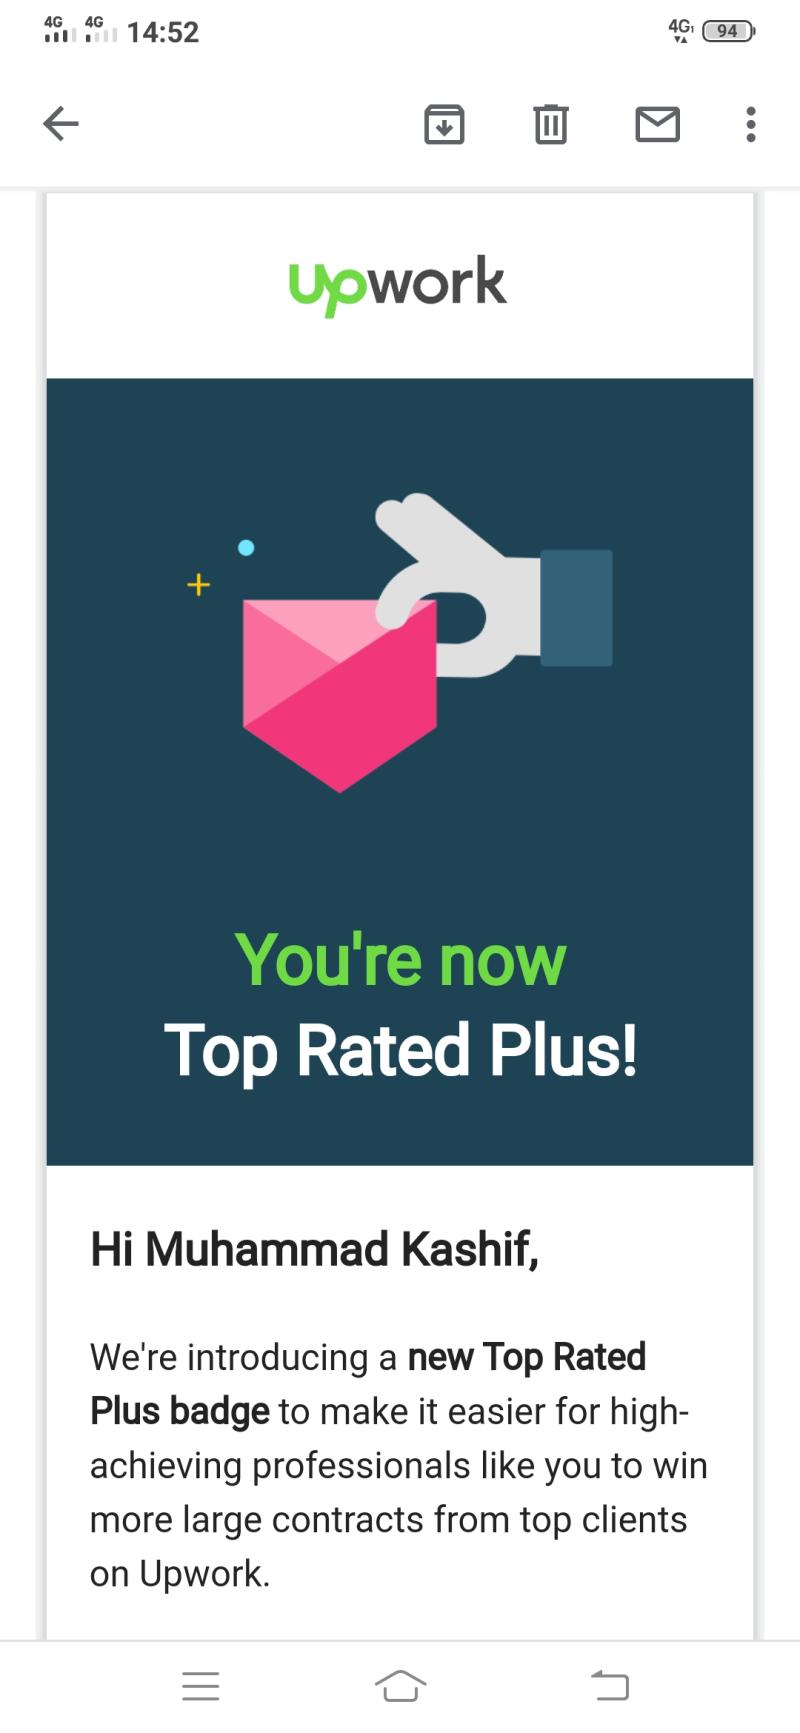 Mehar Muhammad Kashif on LinkedIn: I just received this email from Upwork